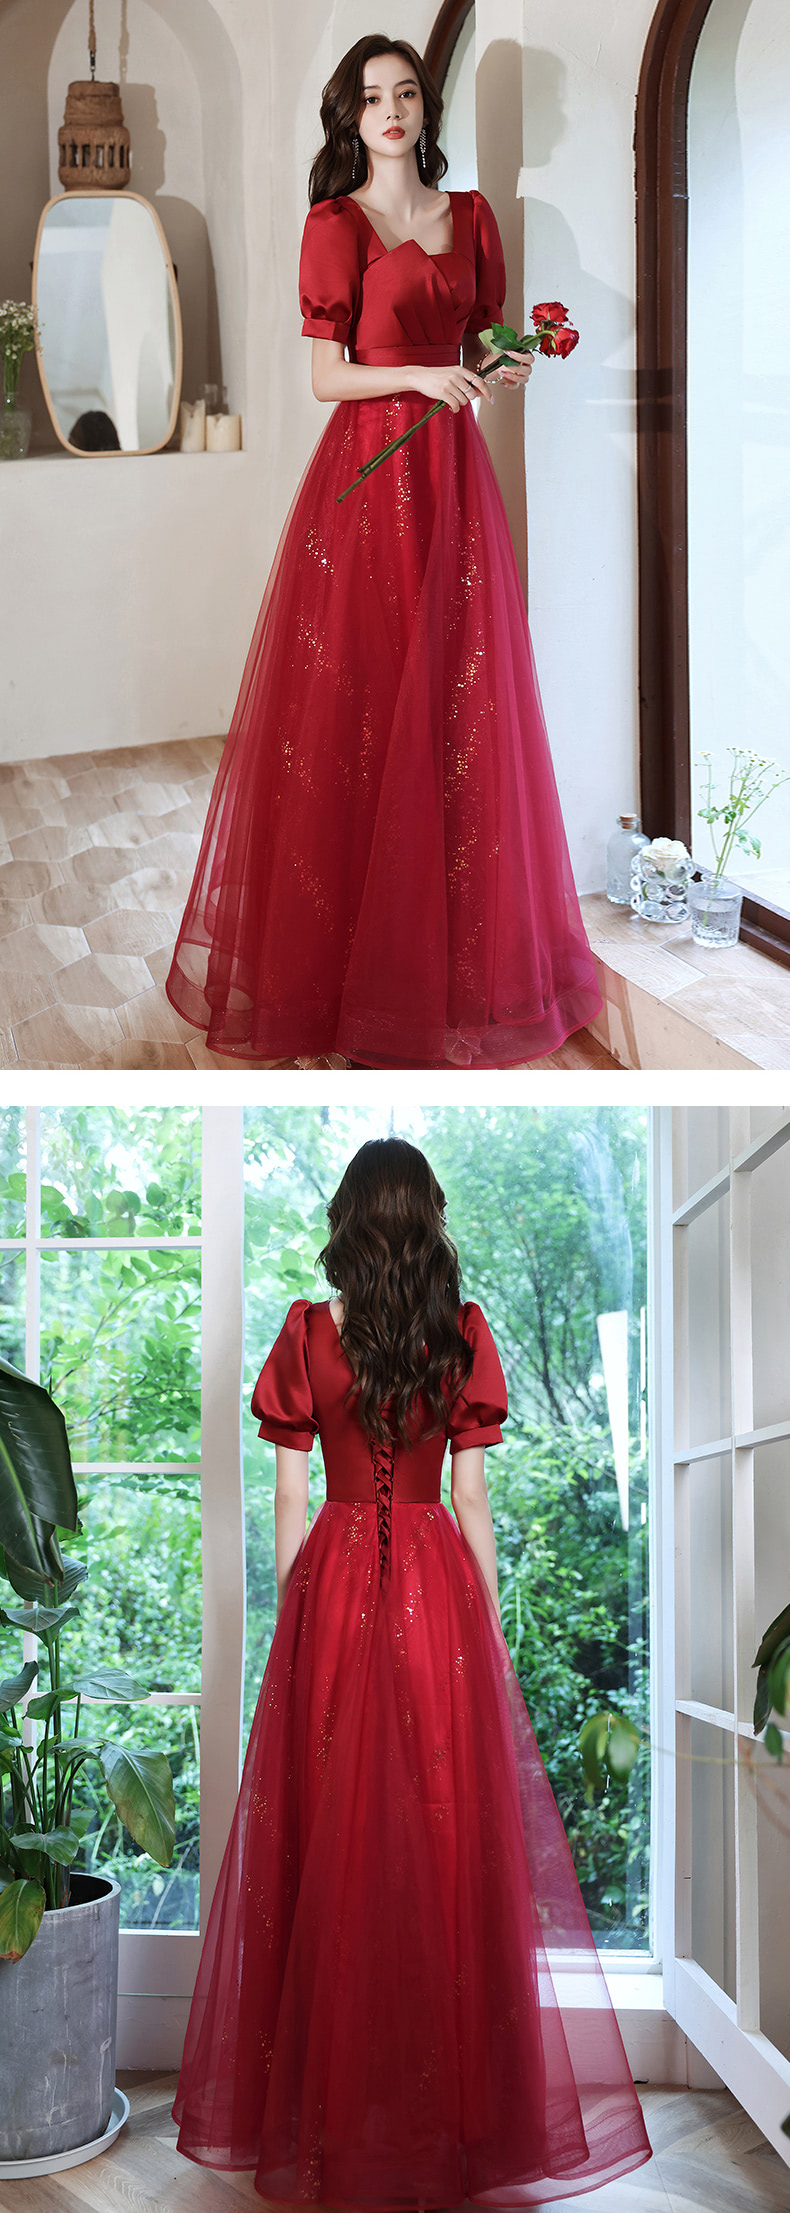 Square-Neck-Short-Puff-Sleeve-Burgundy-Tulle-Prom-Party-Dress17.jpg